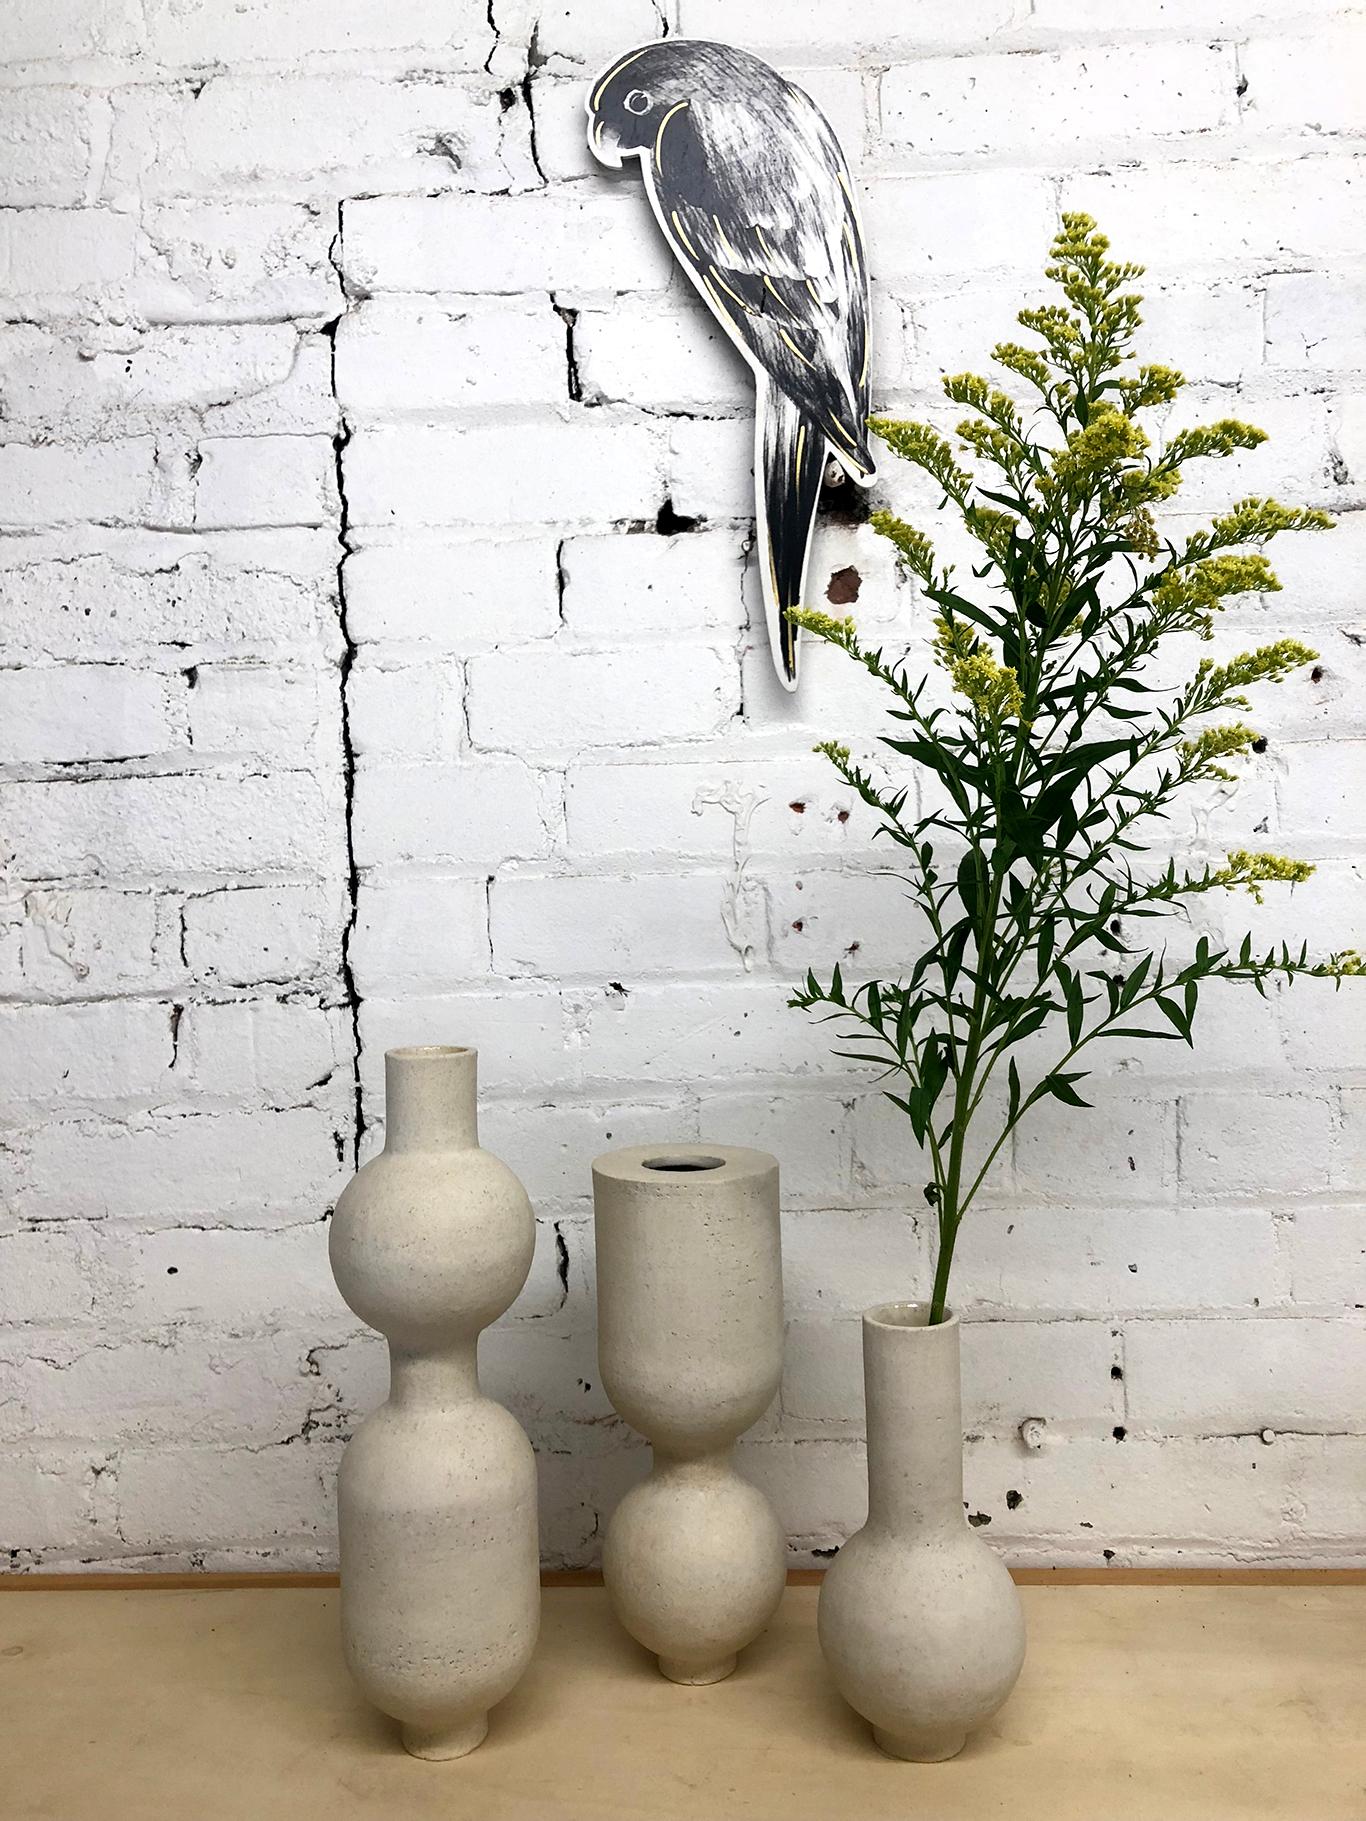 This exquisite sculptural ceramic stoneware BBL-5 Vessel by Humble Matter is hand-built out of an off-white textured stoneware with a smooth semi-matte glaze, which reflects a subtle hue that changes with the light. The piece measures 8